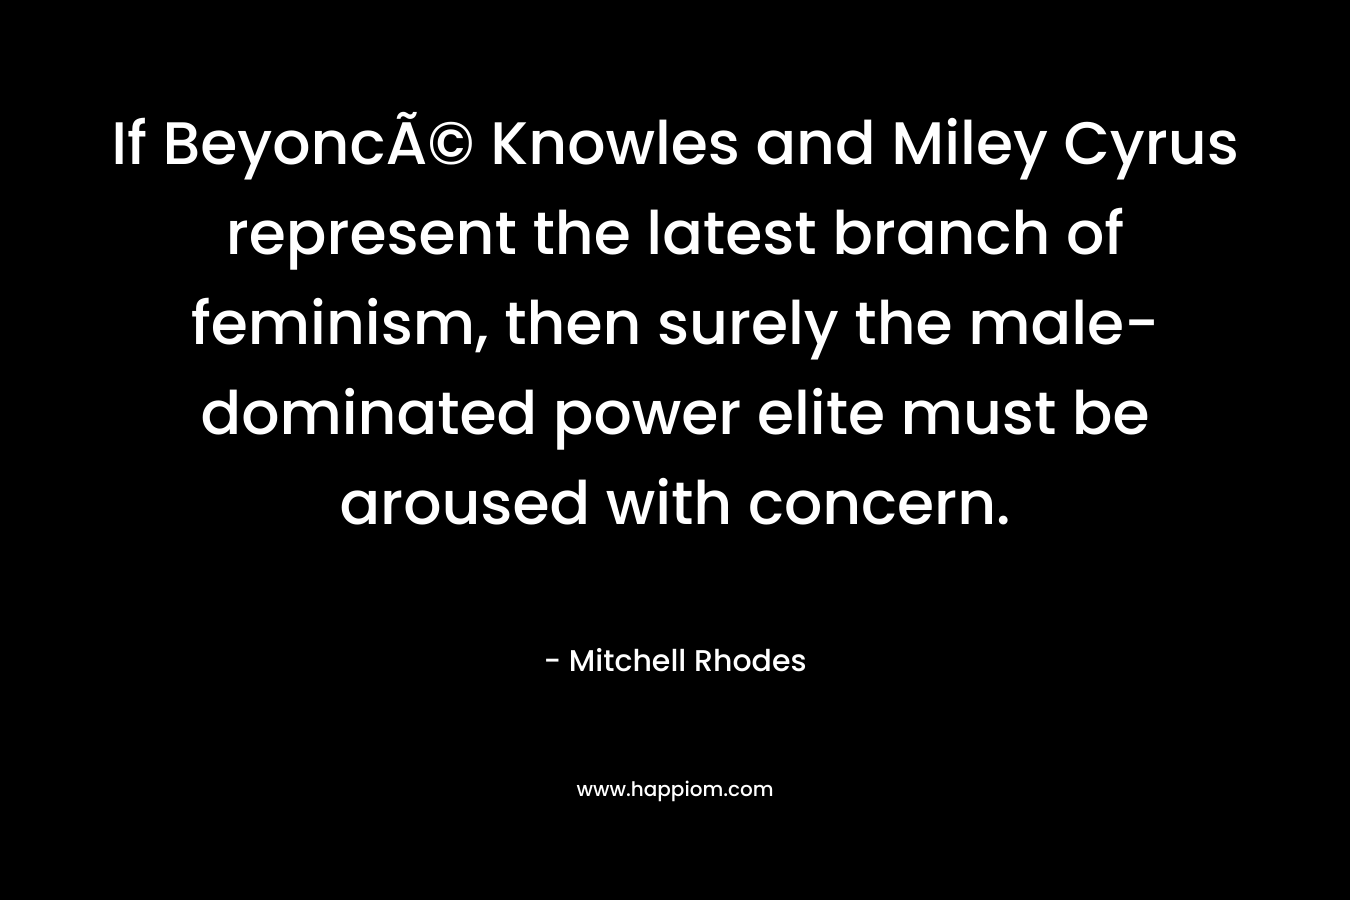 If BeyoncÃ© Knowles and Miley Cyrus represent the latest branch of feminism, then surely the male-dominated power elite must be aroused with concern. – Mitchell Rhodes